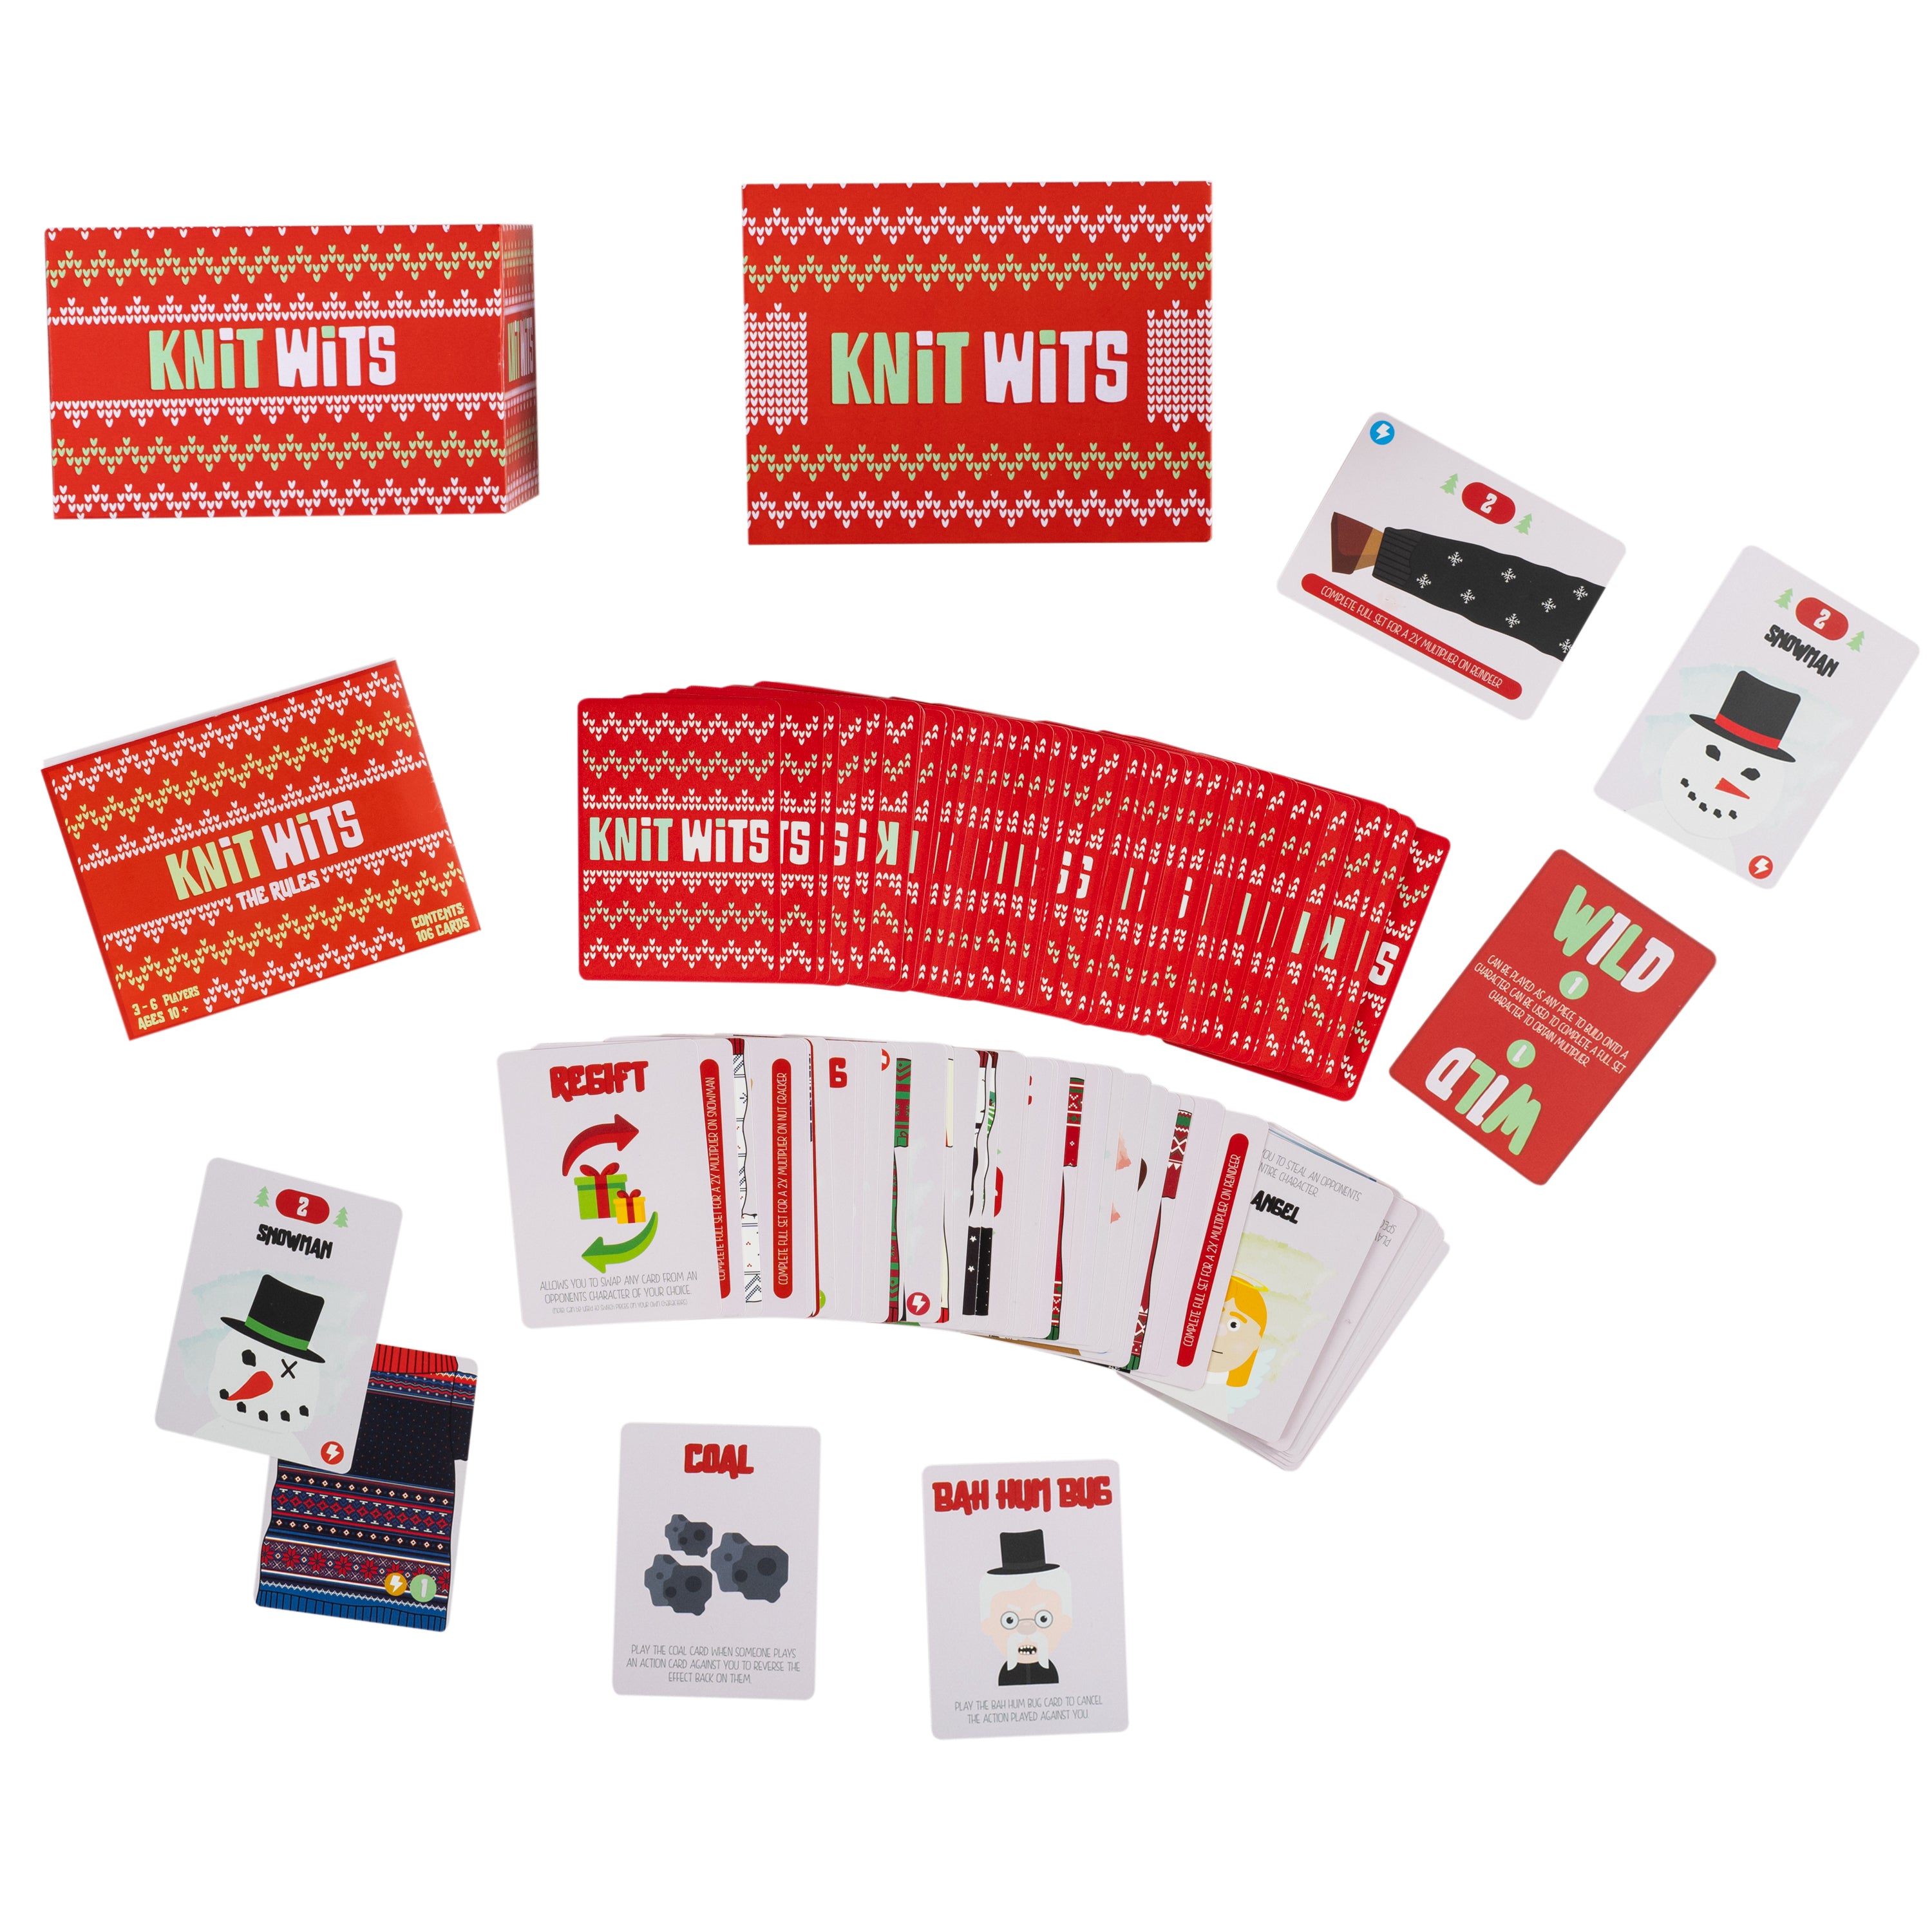 KnitWits - Family Card Game